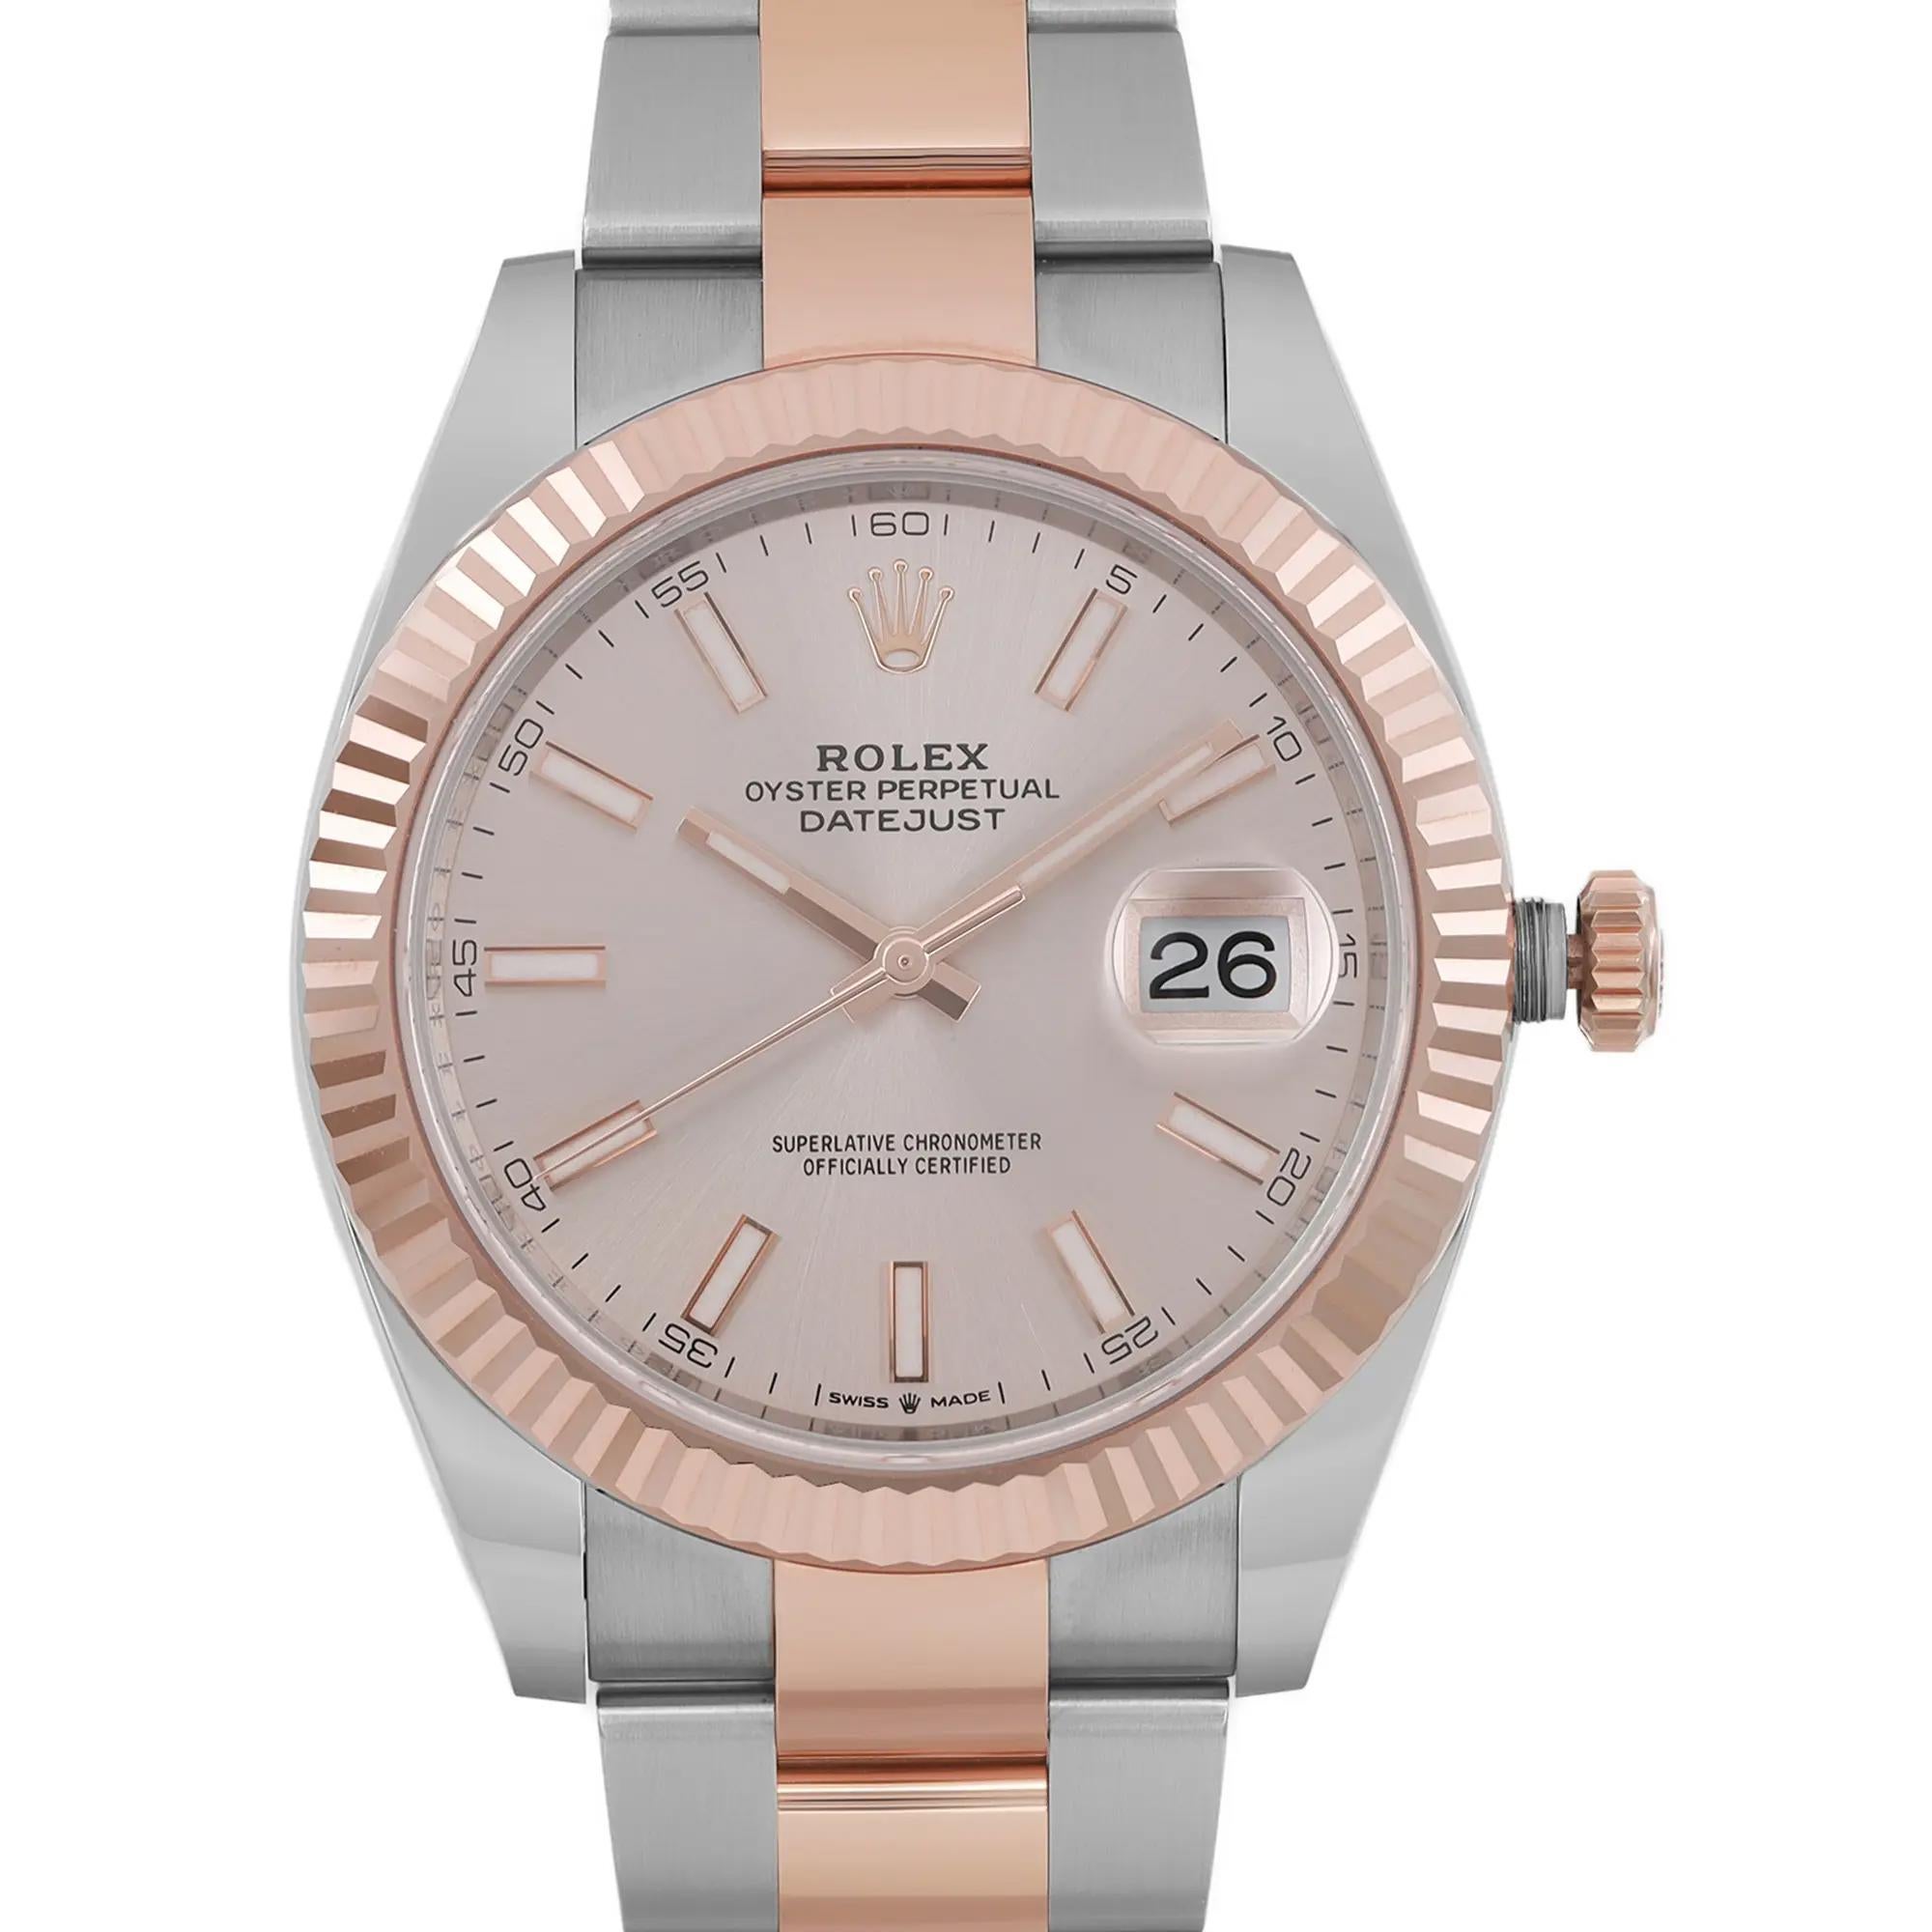 Unworn. 2022 card. Comes with the original box and papers.

General Information
Brand: Rolex
Model: Datejust 126331
Type: Wristwatch
Department: Men
Style: Luxury
Vintage: No
Country/Region of Manufacture: Switzerland
Year Manufactured: